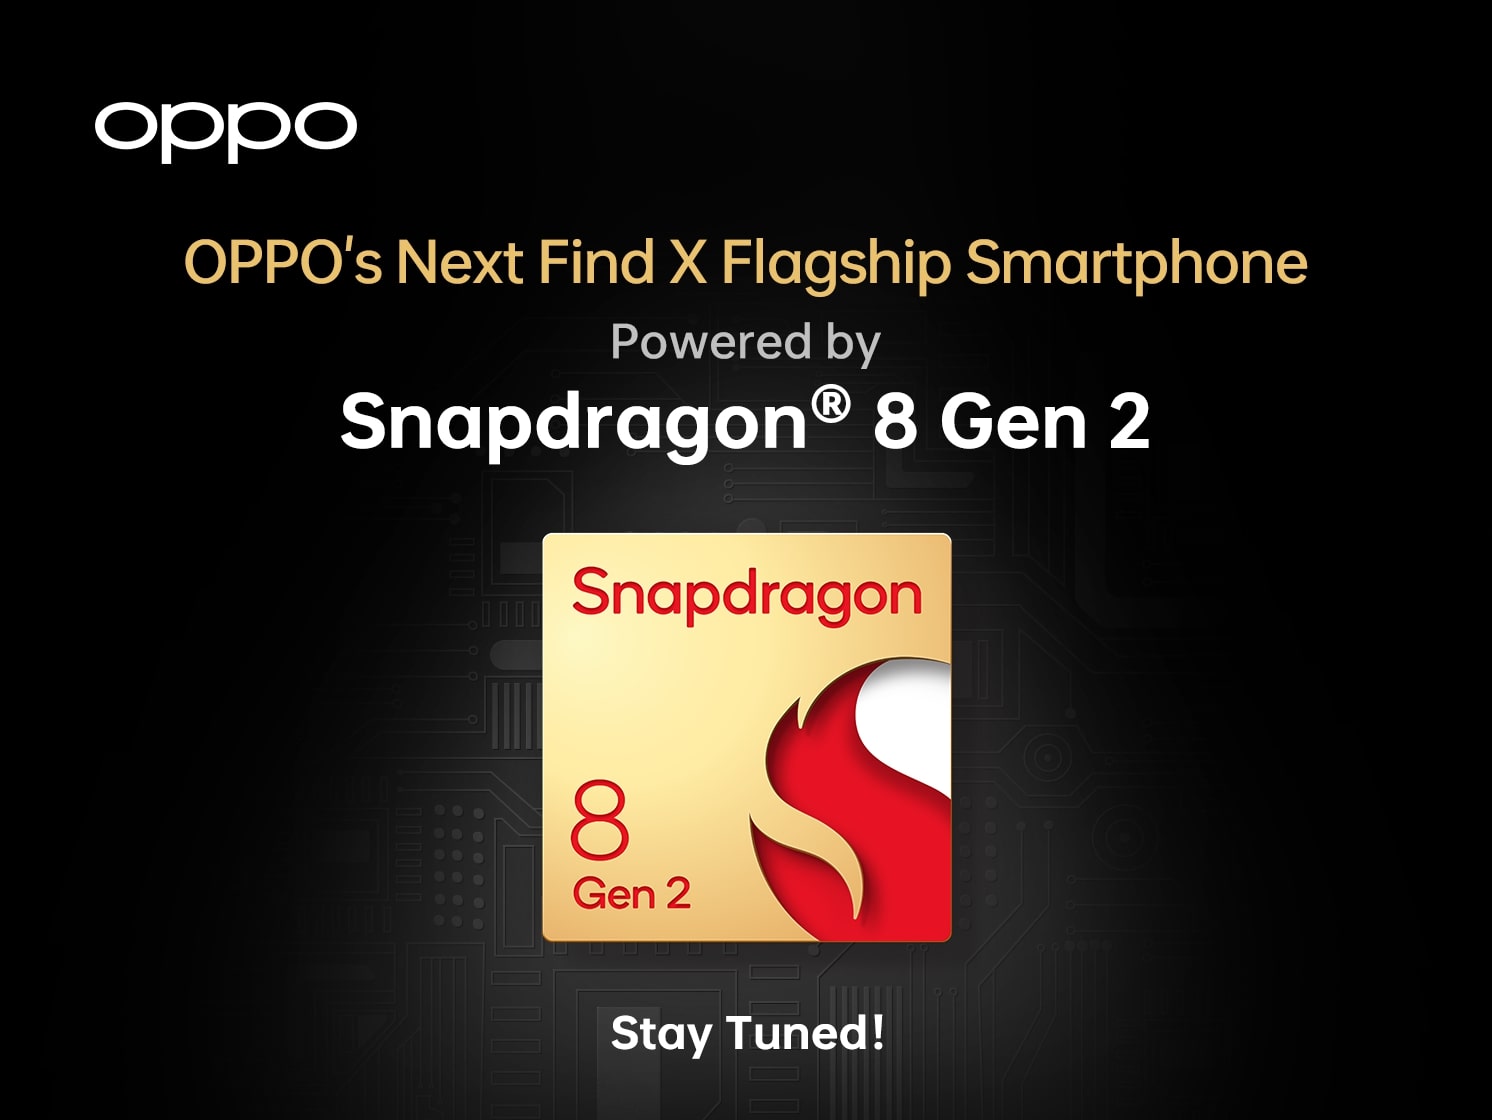 OPPO's next Find X will be powered by Snapdragon 8 Gen 2